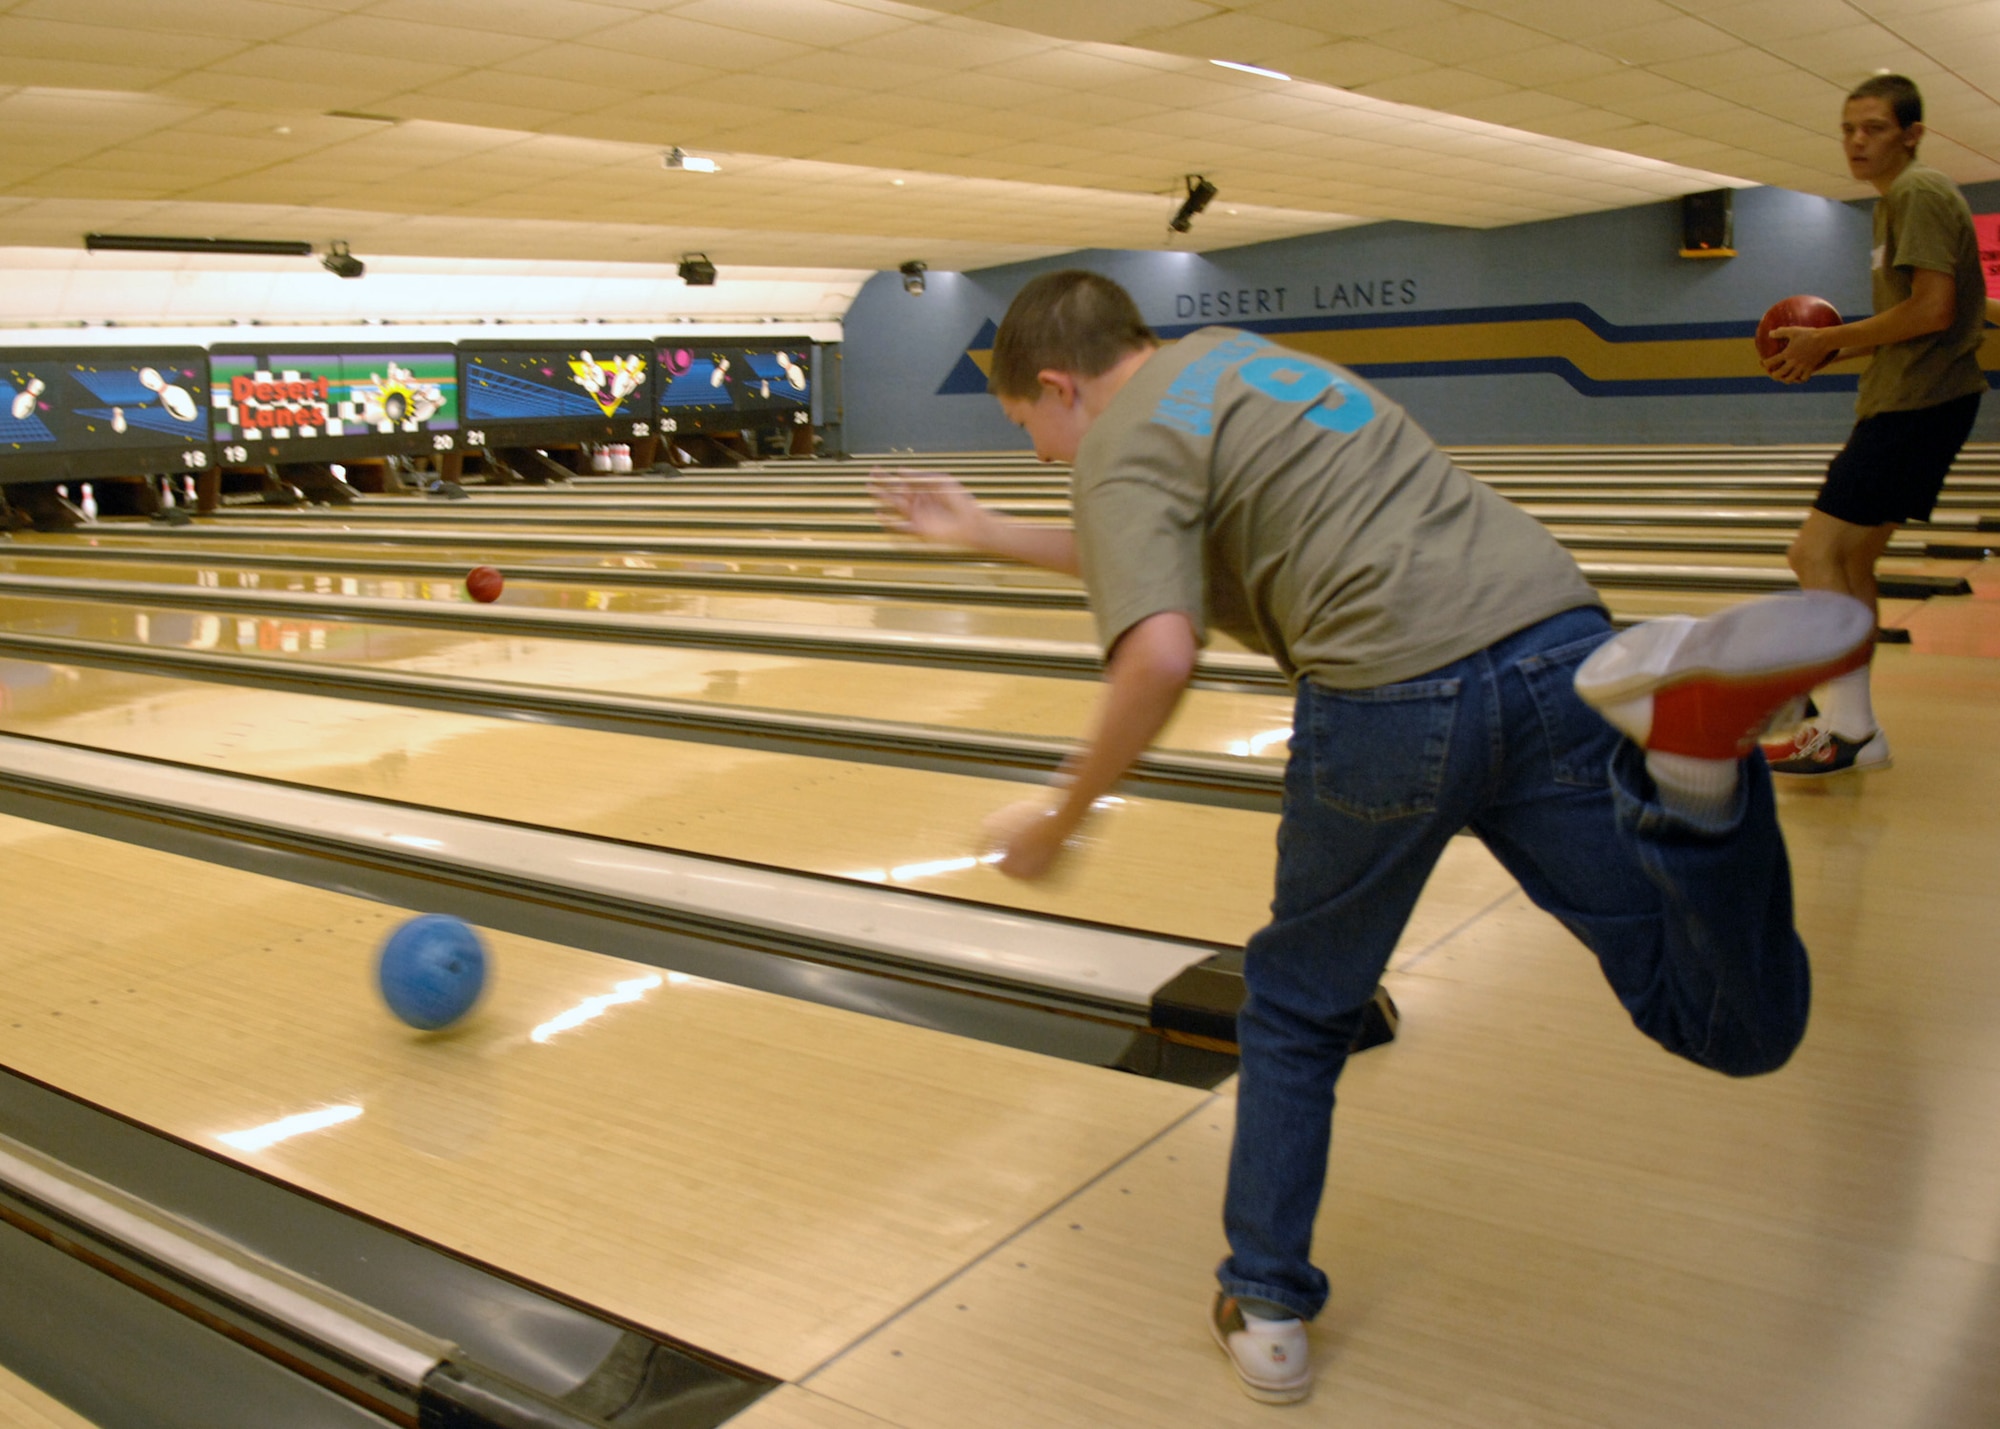 A player from Las Cruces Public School bowls during the Special Olympics bowling competition at Holloman Air Force Base, N.M., October 24. Teams from Las Cruces, N.M., competed against teams from Otero County at the Desert Lanes bowling alley. (U.S. Air Force photo/Airman 1st Class Veronica Salgado)